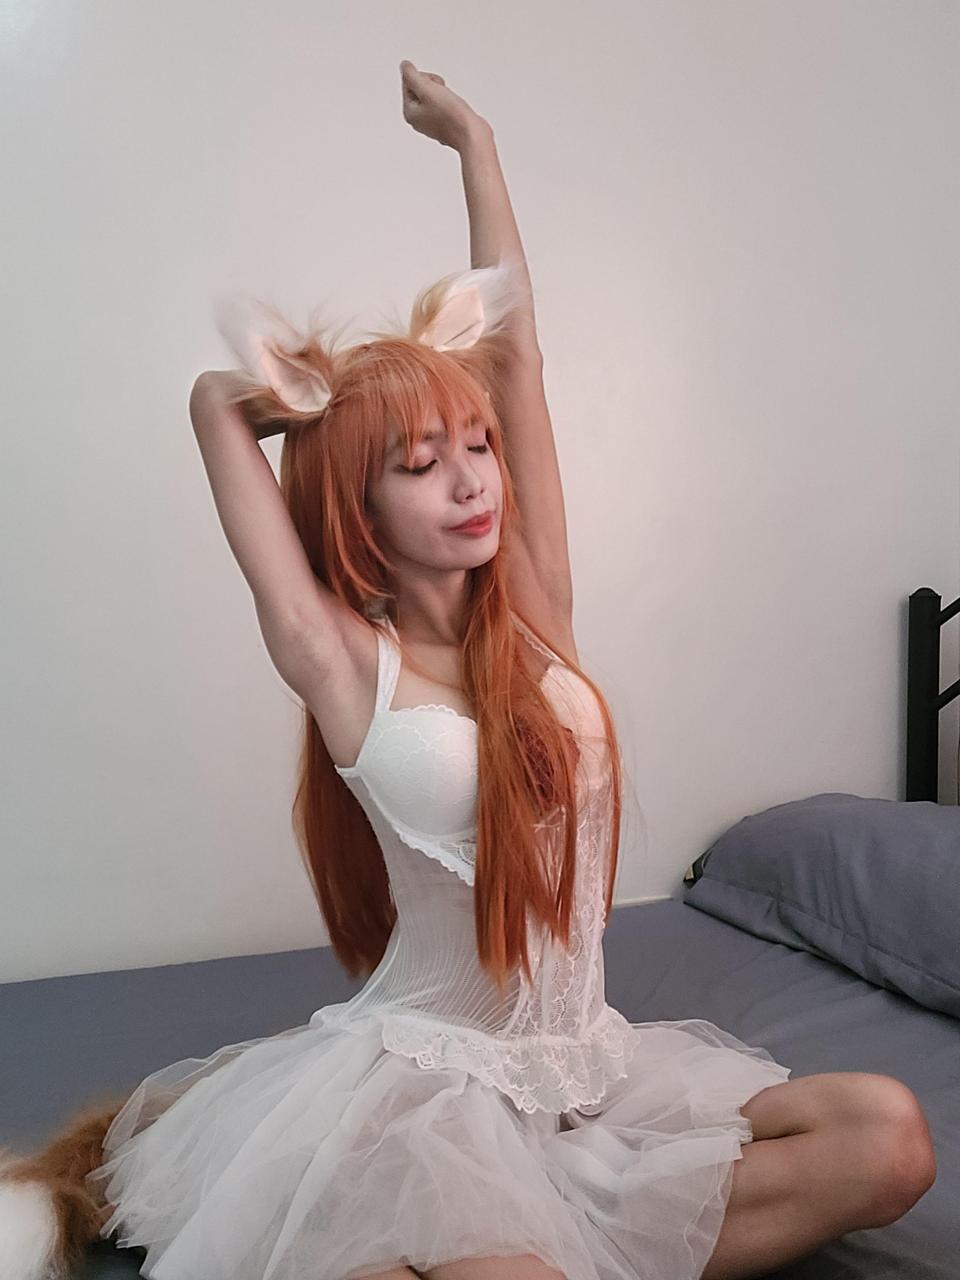 Holo From Spice And Wolf By Yuriehear